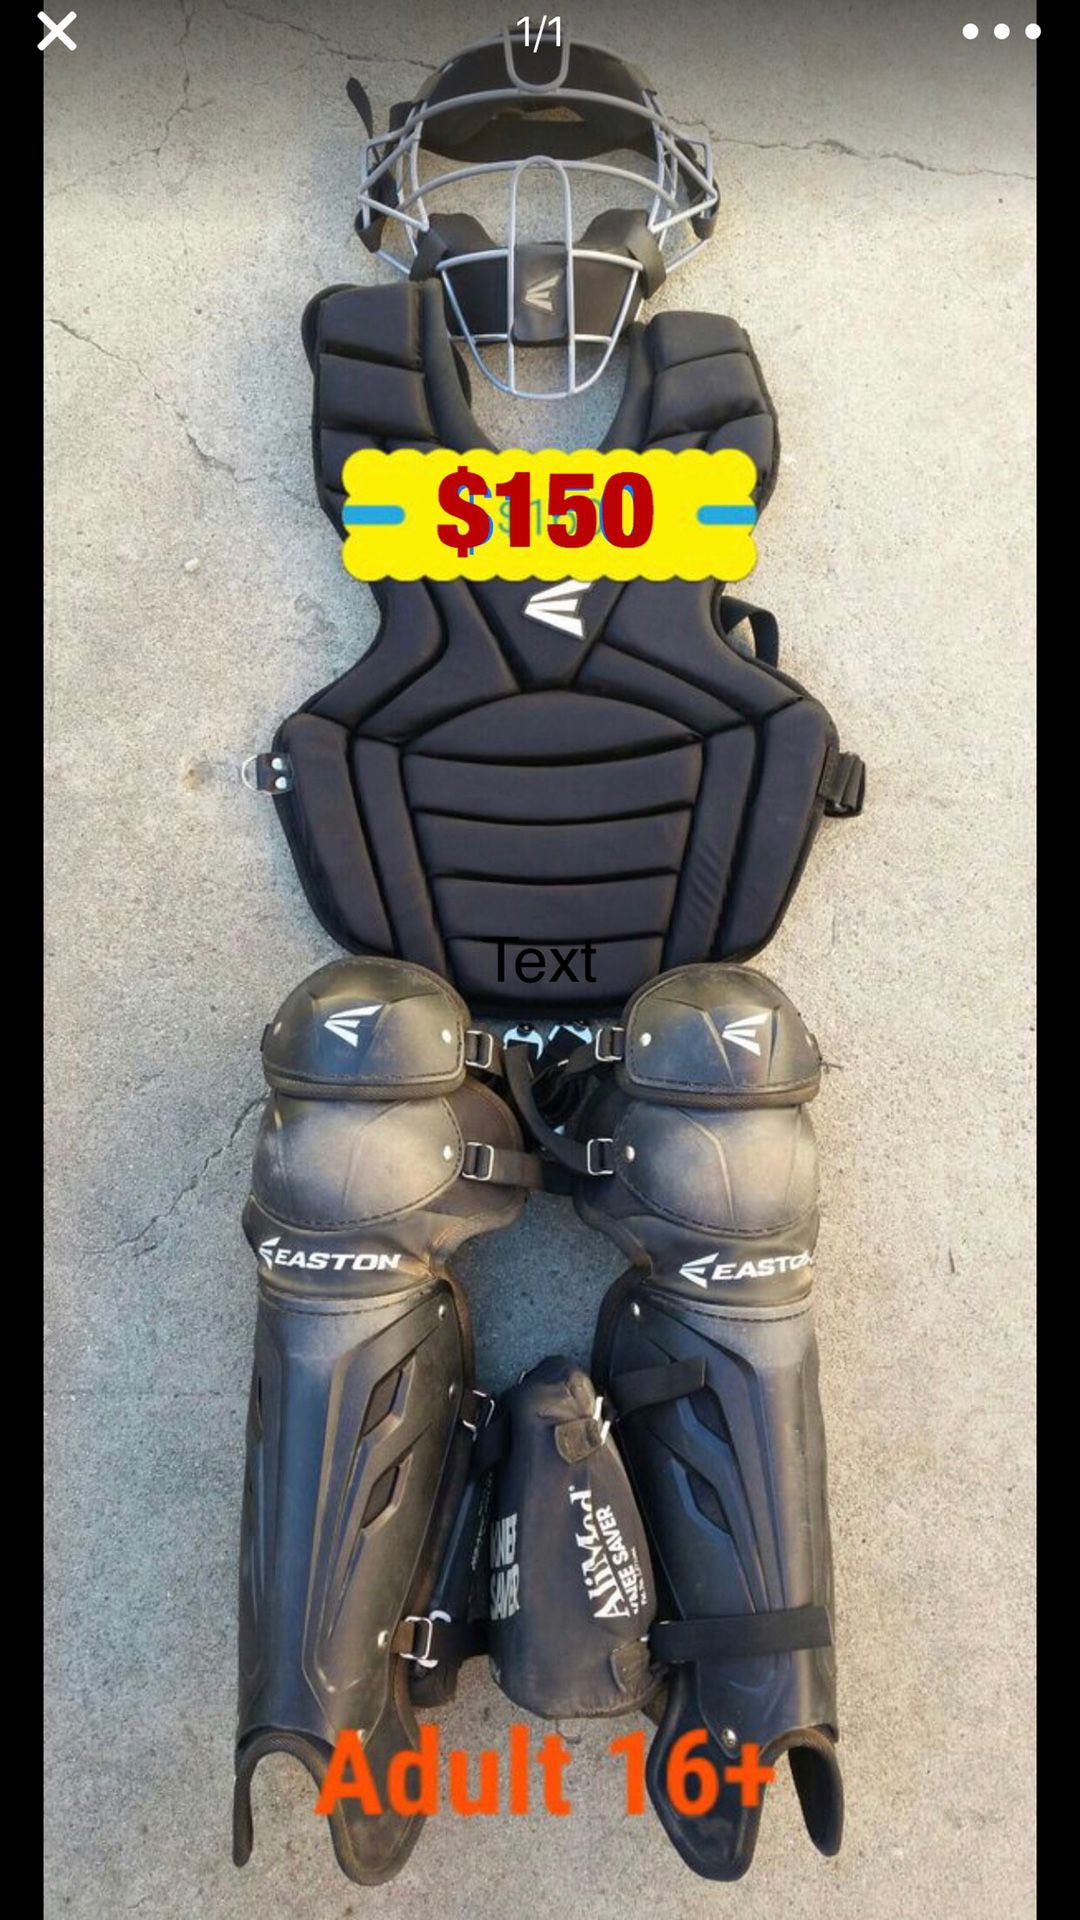 Baseball catcher gear complete set in great condition equipment bats gloves